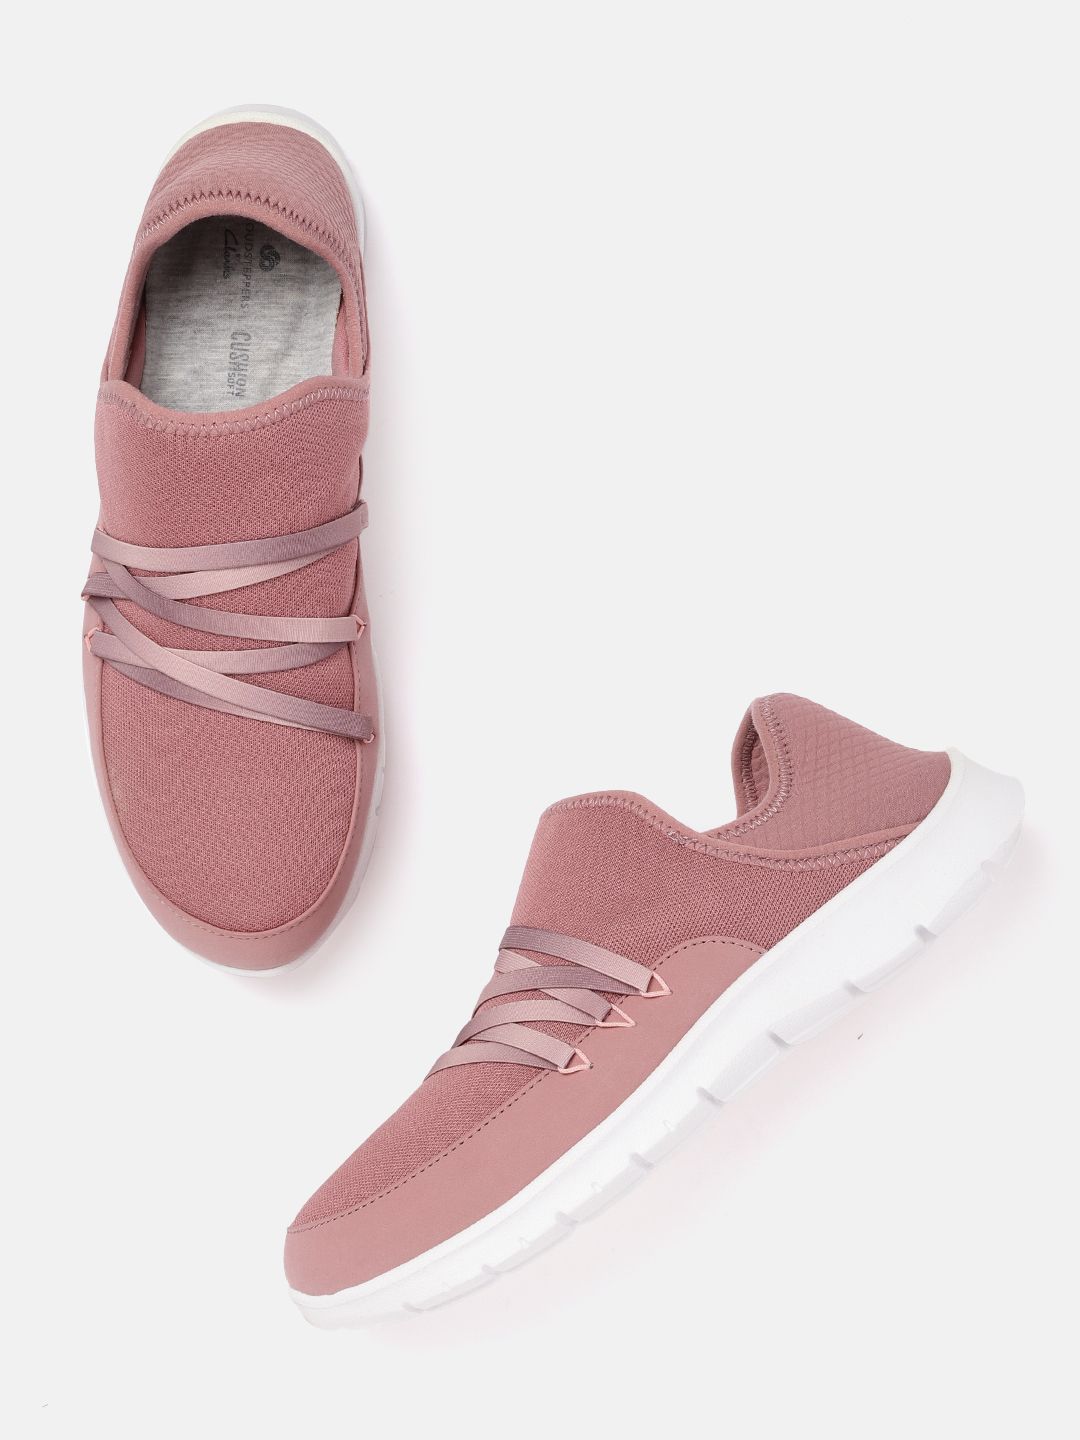 Clarks Women Peach-Coloured Woven Design Slip-On Sneakers Price in India